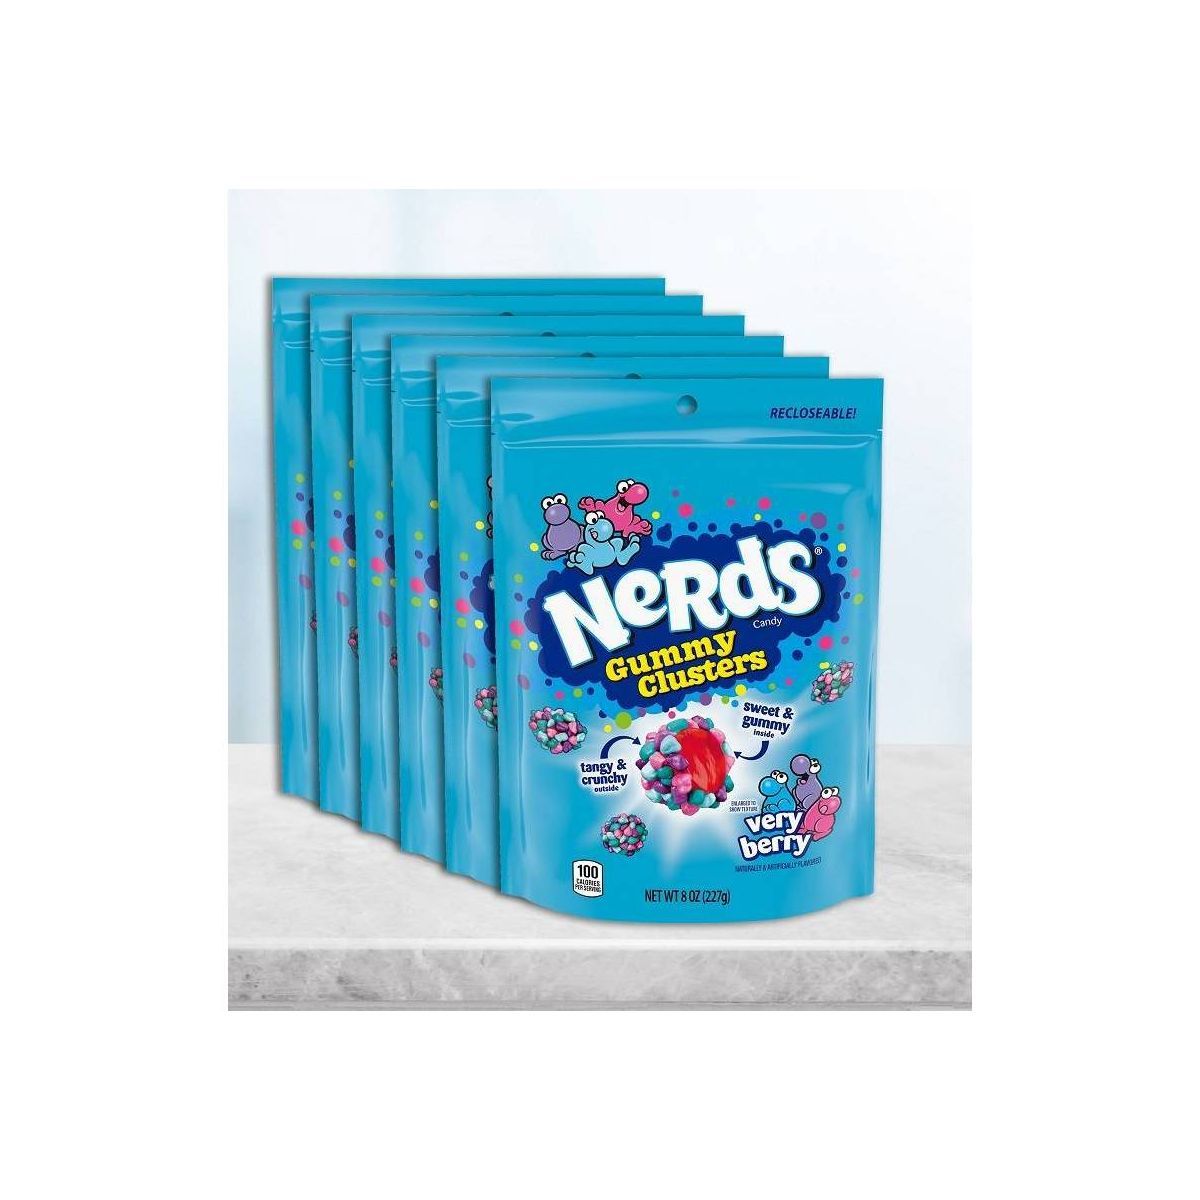 Nerds Gummy Clusters Candy - 6ct | Target